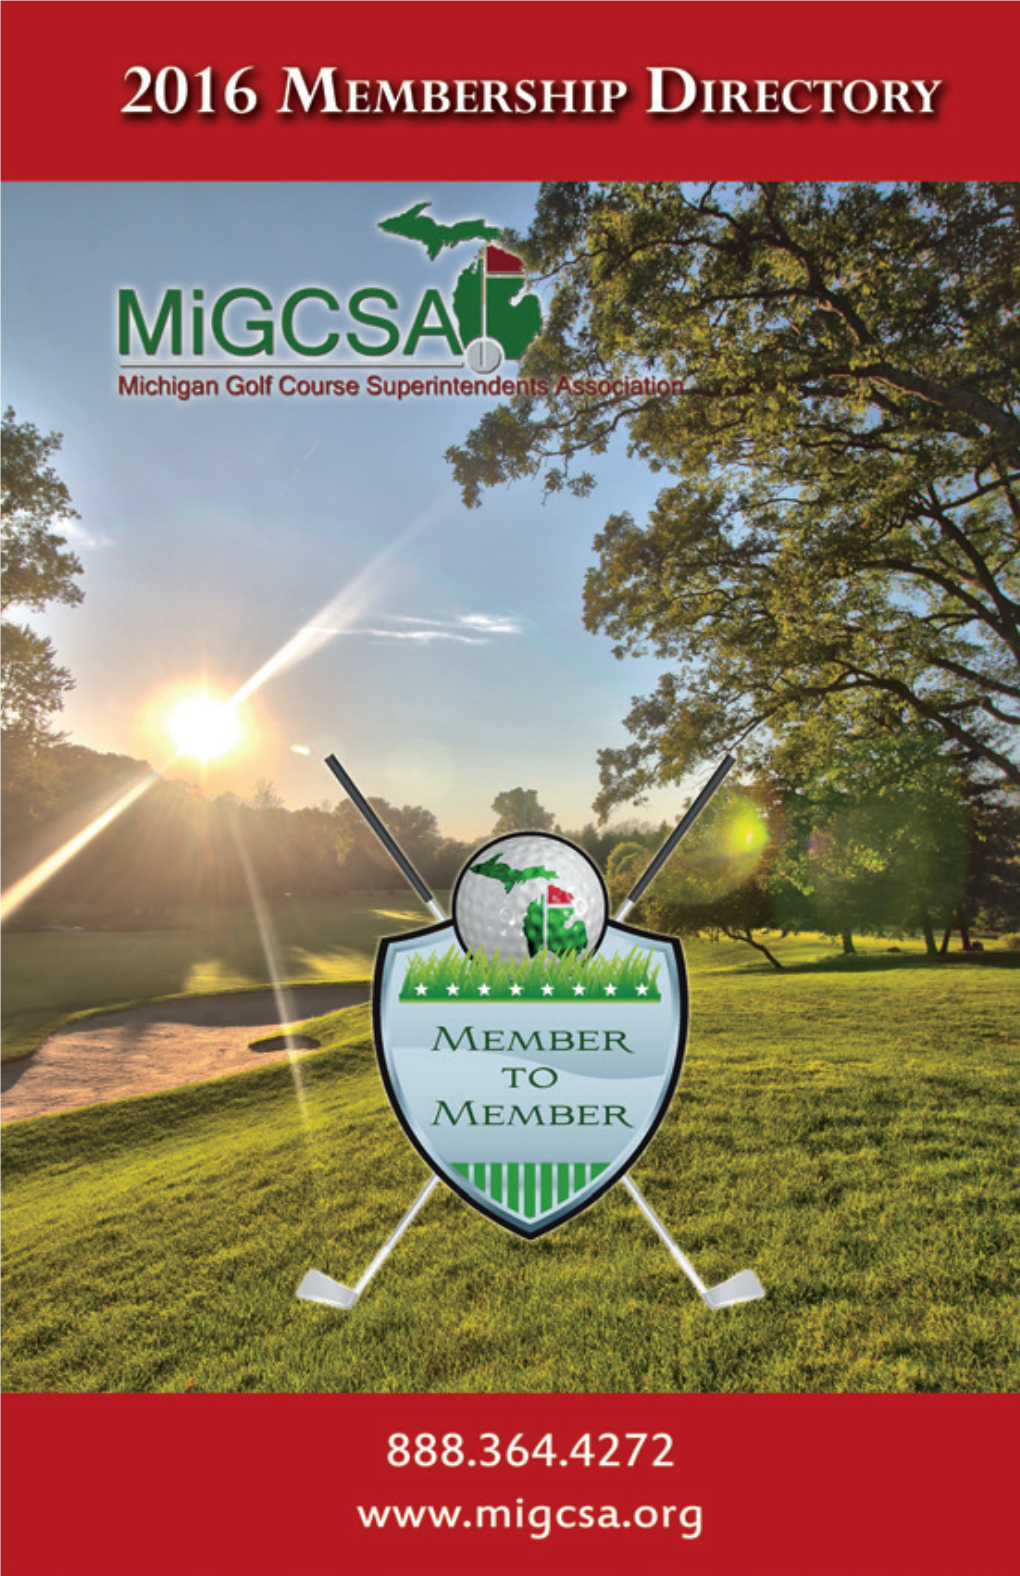 LETTER from the Migcsa PRESIDENT